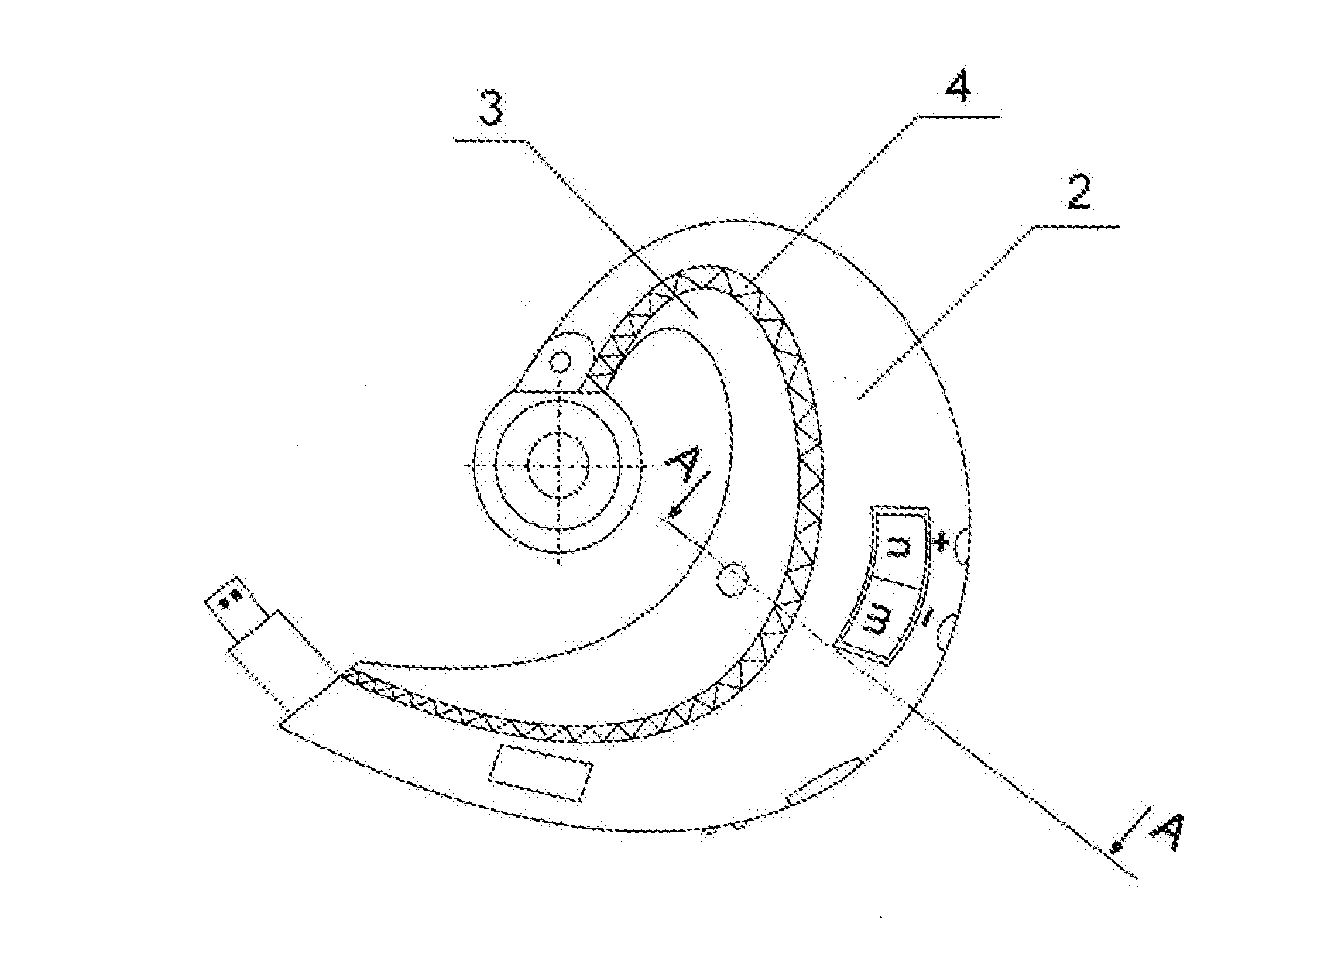 Chewing monitoring device